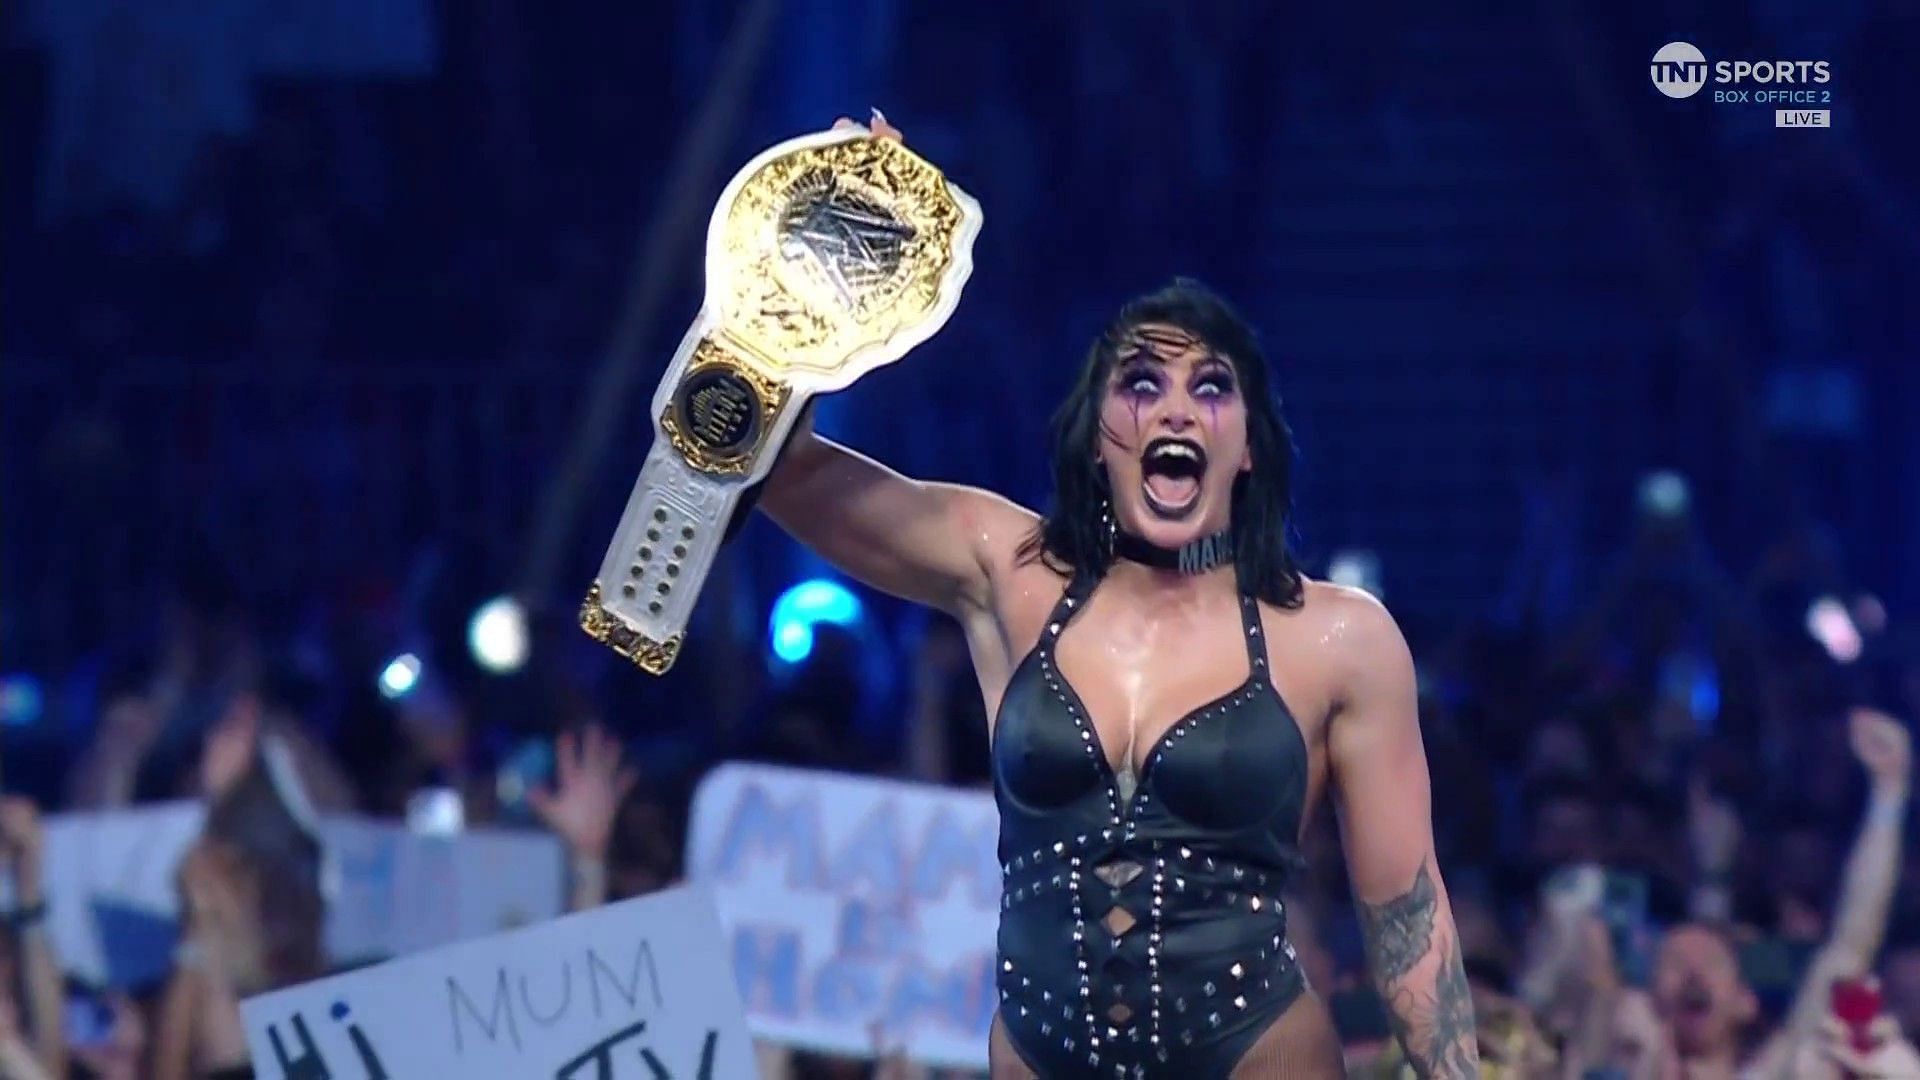 Rhea Ripley retained her title at Elimination Chamber